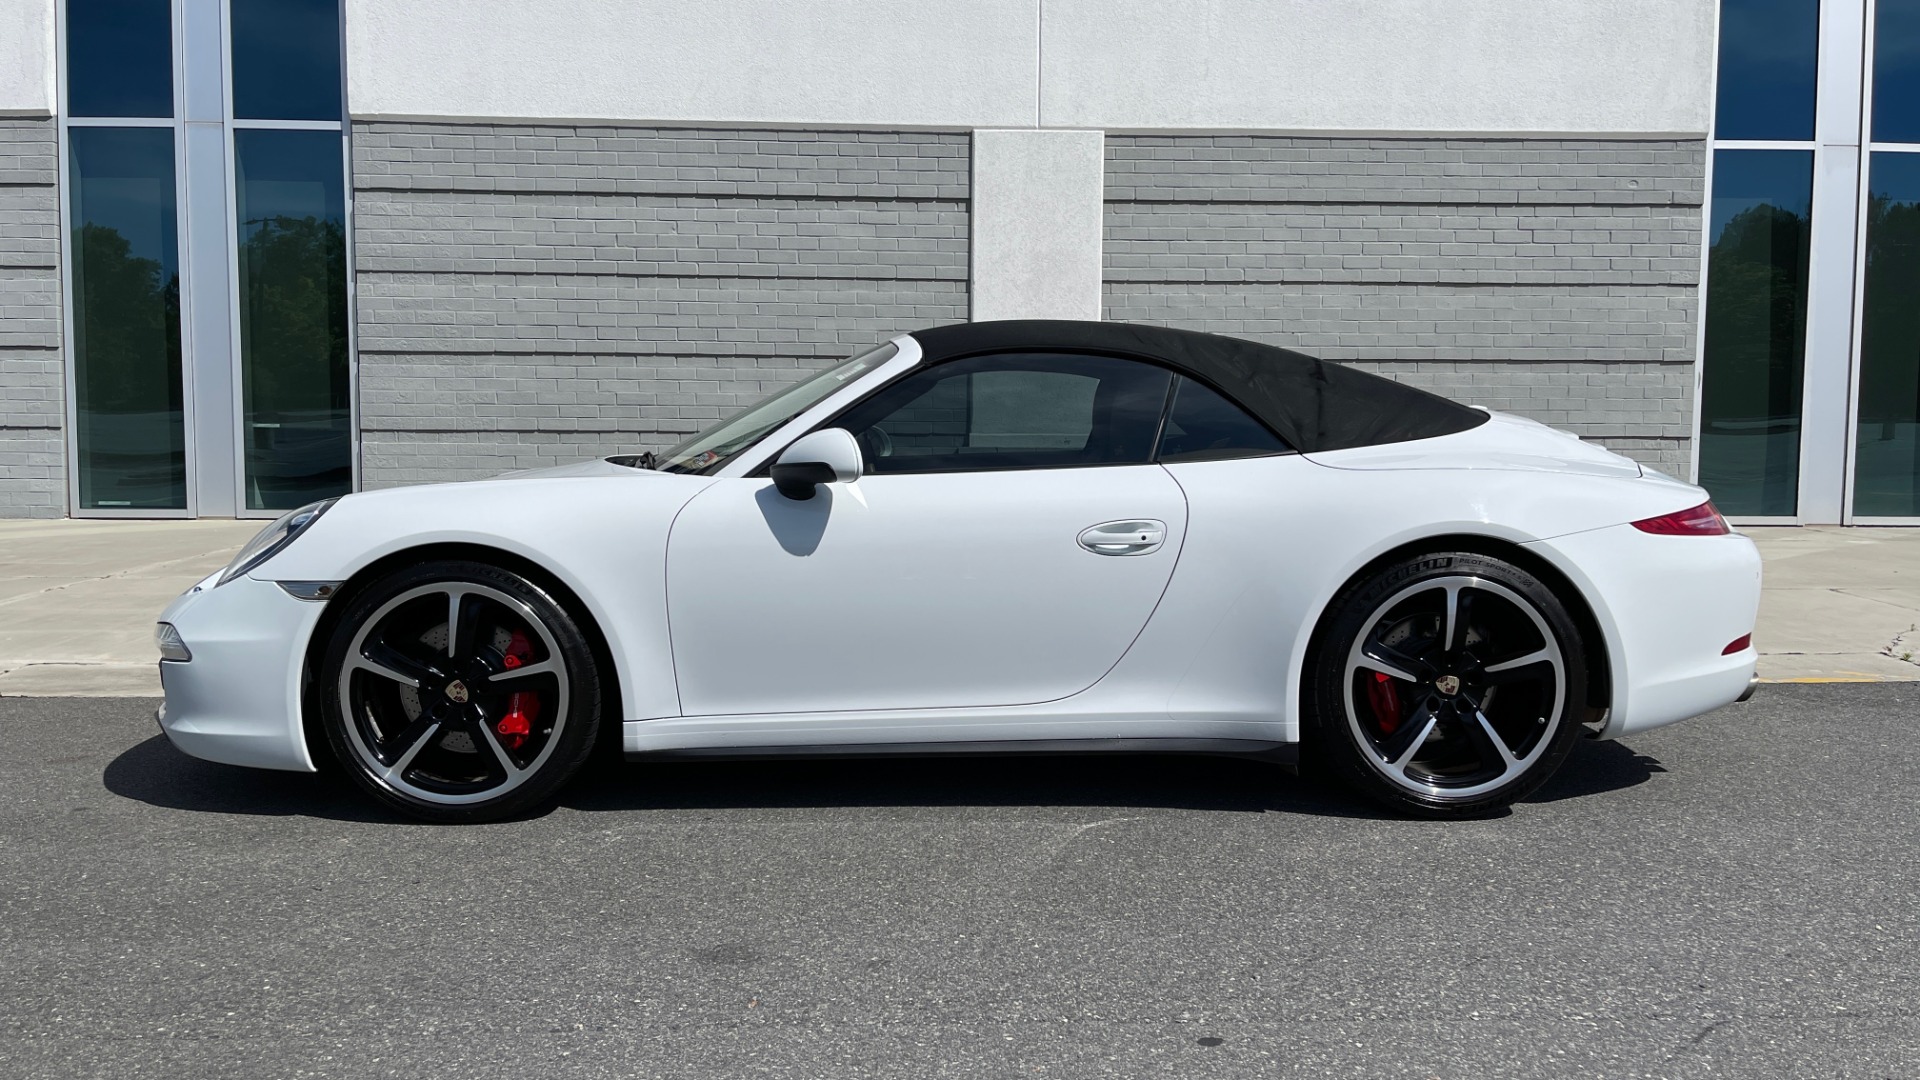 Used 2013 Porsche 911 CARRERA 4S CABRIOLET / PREMIUM PLUS / BOSE / PDK / PDLS for sale Sold at Formula Imports in Charlotte NC 28227 8